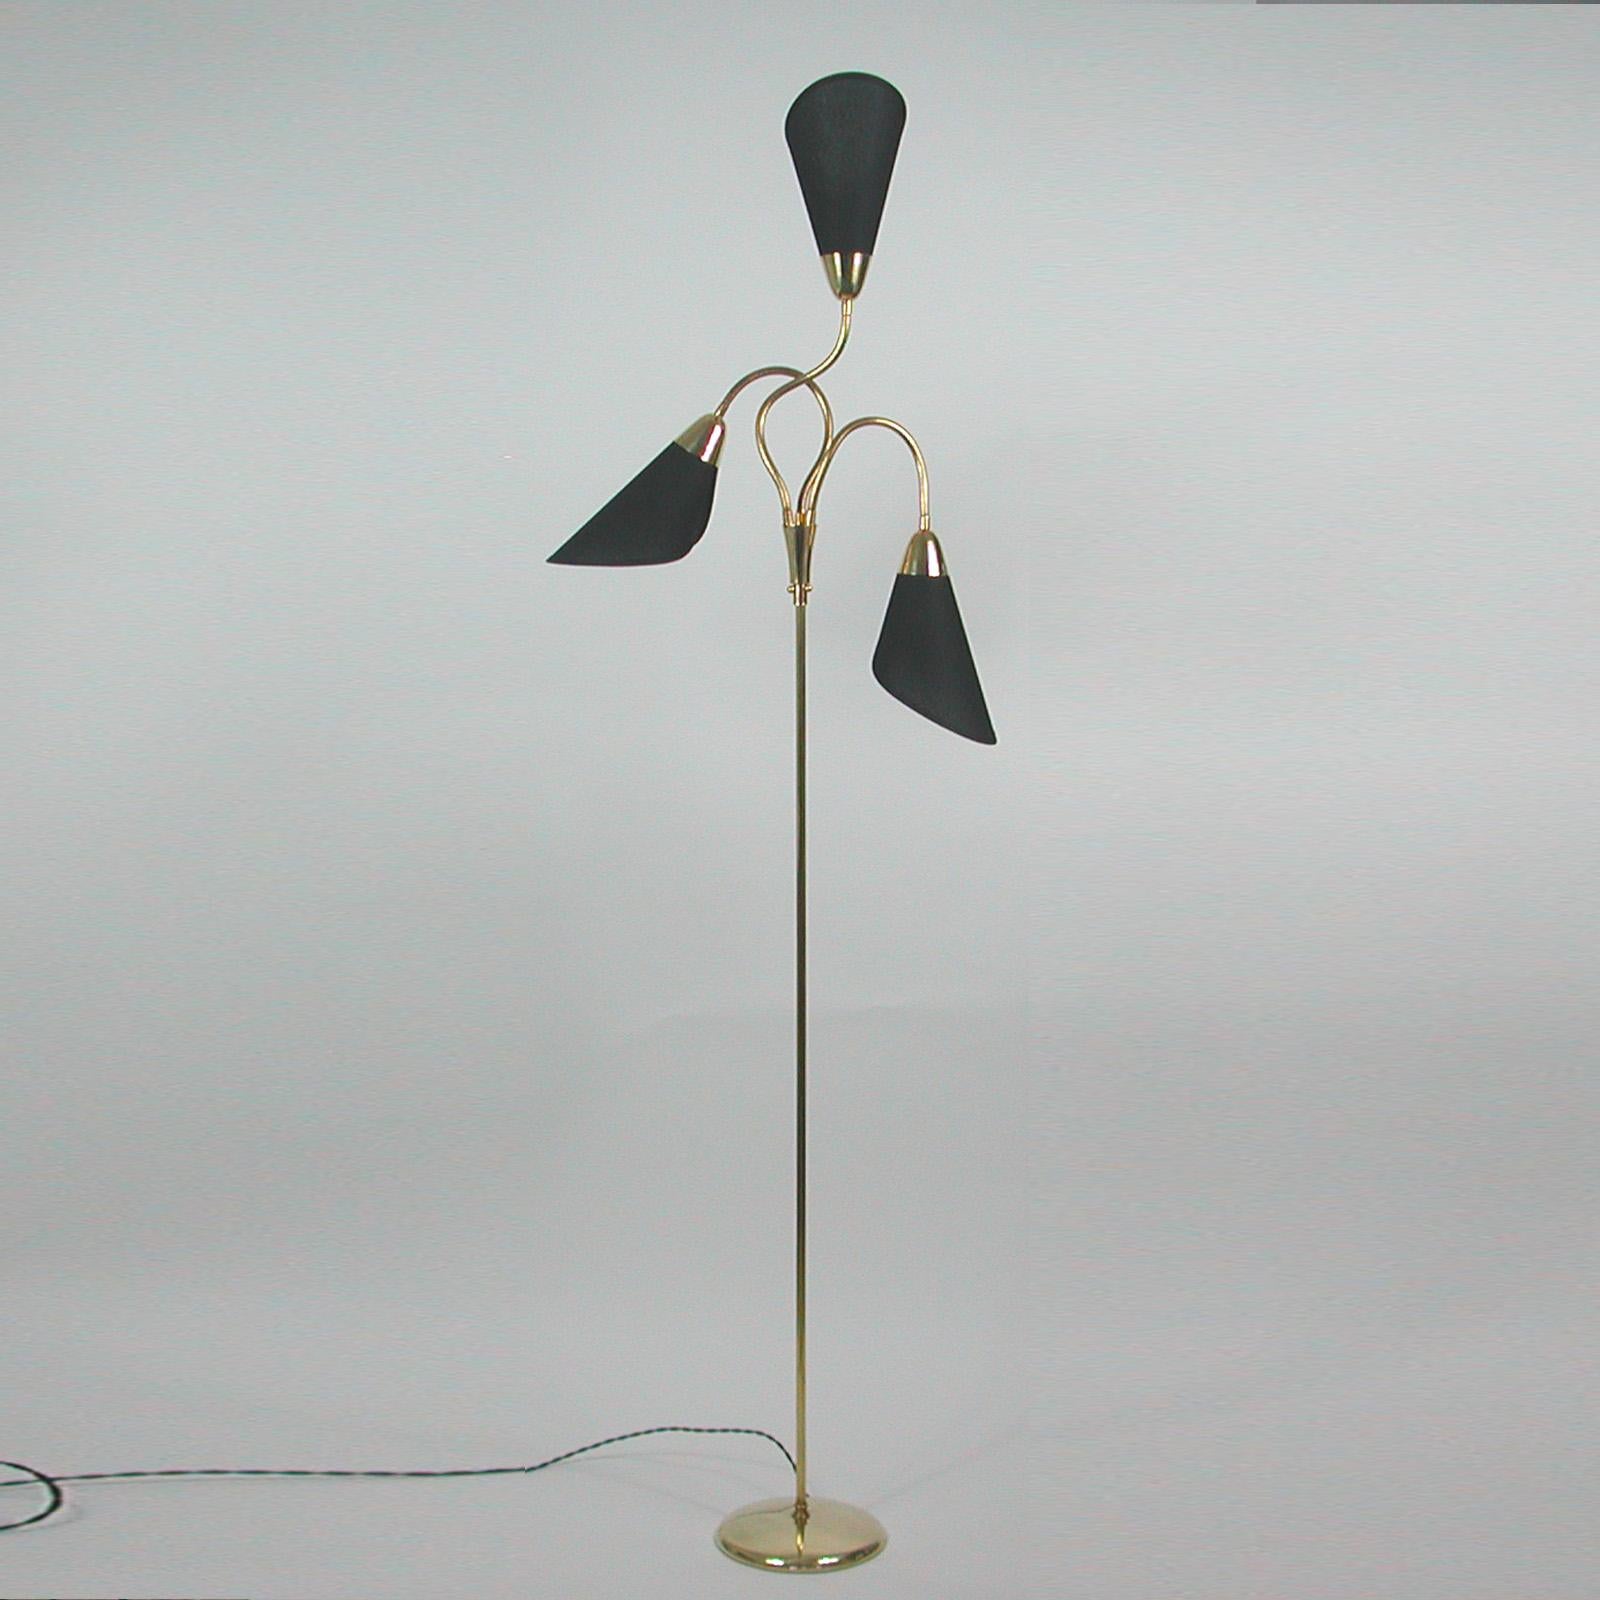 This unusual mid-century brass gooseneck floor lamp was made in Germany in the 1950s.

The lamp features a round brass base and three adjustable gooseneck lamp arms with handmade black cotton shades. The fabric shades have been refurbished and the